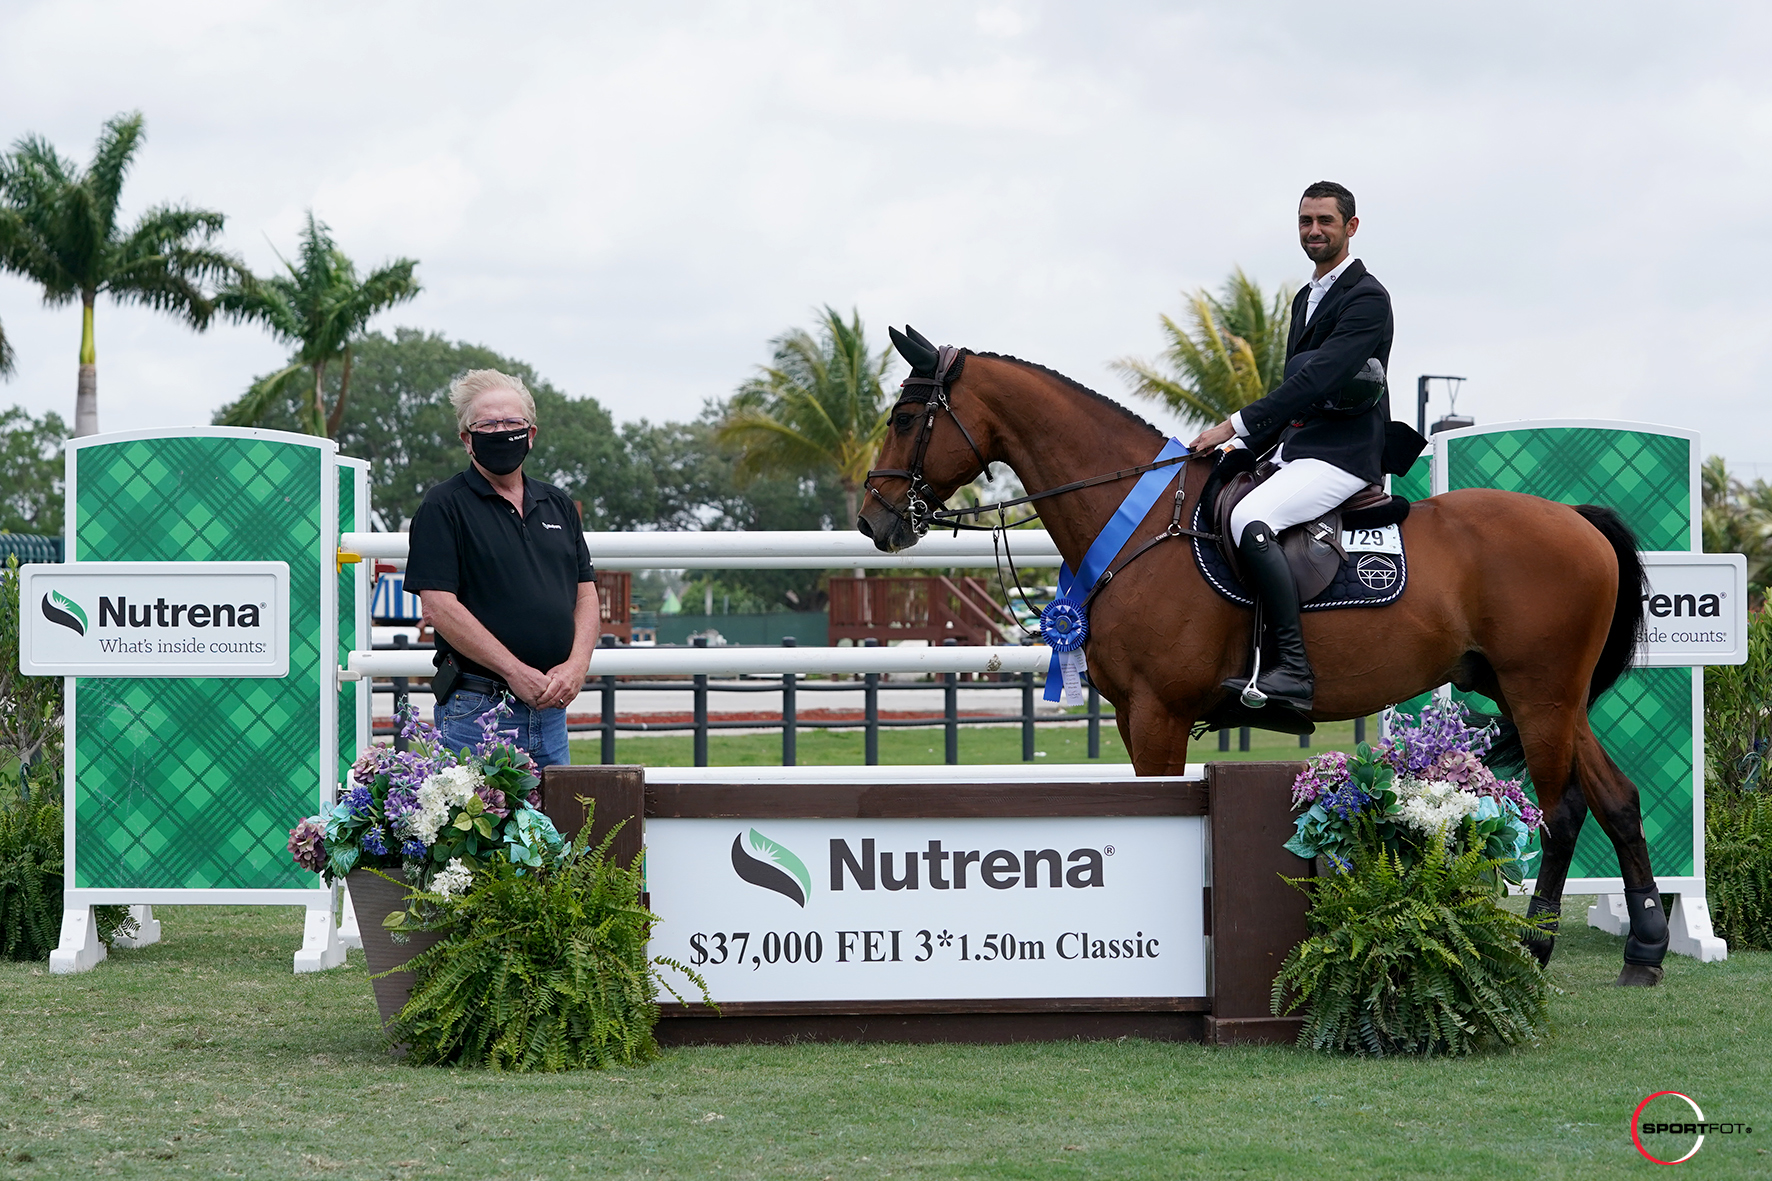 Nassar Is Superb, Picking Up Second Win of the Week in $37,000 Nutrena 1.50m Classic CSI3*